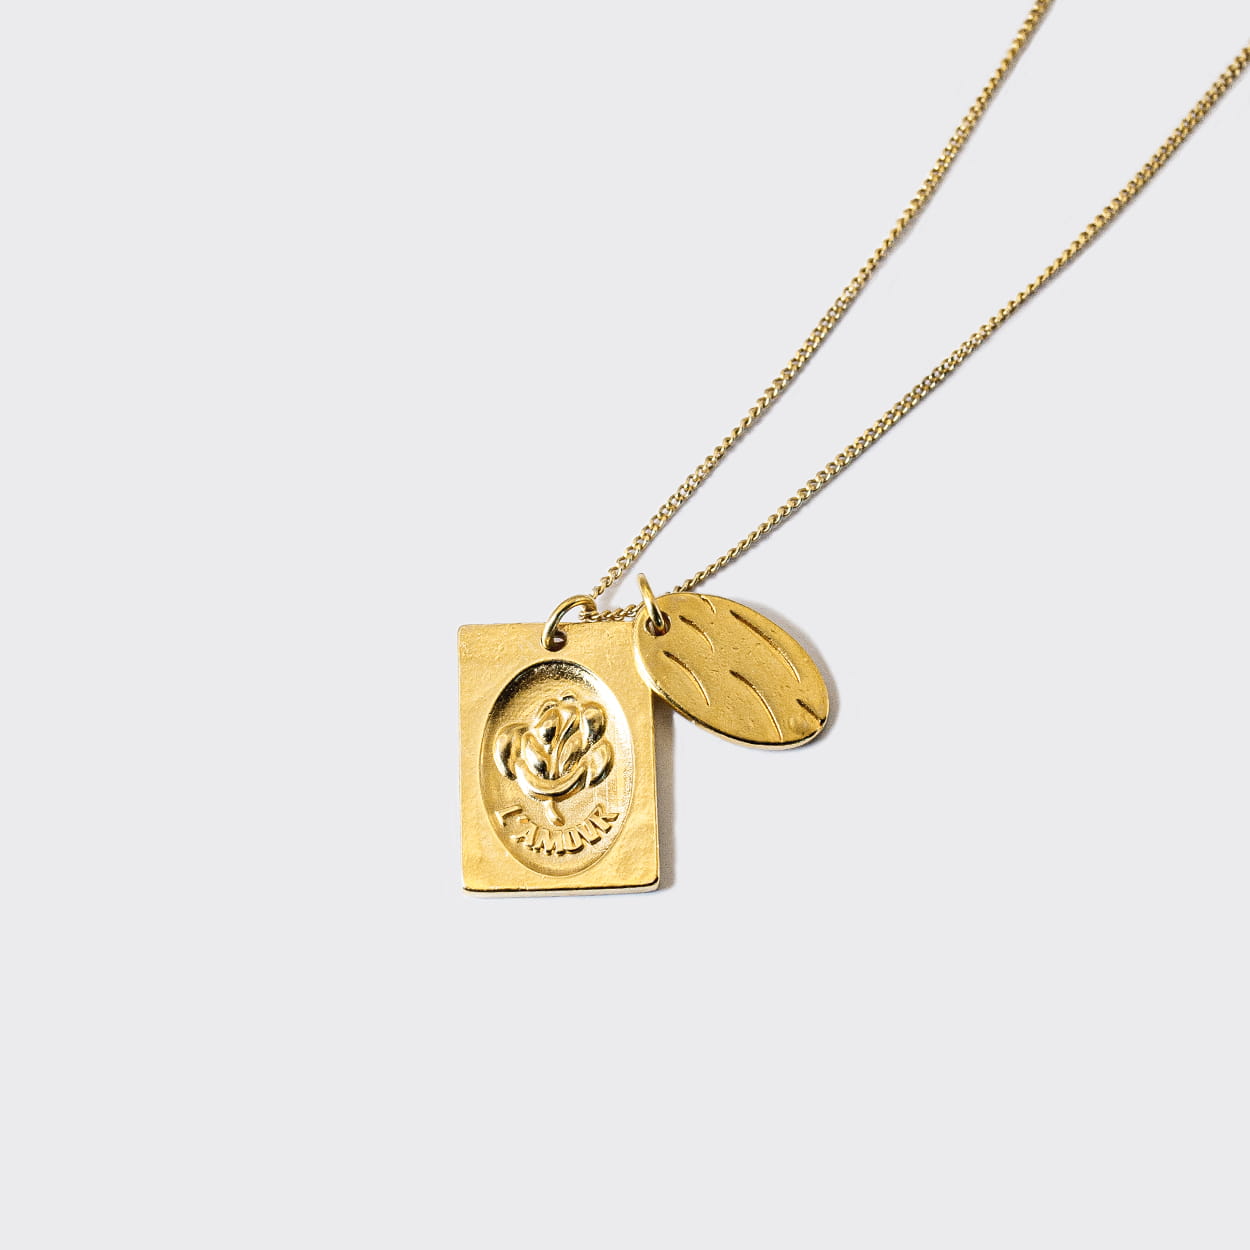 Atelier Domingo's L'Amour necklace is made in Spain. This jewelry is unisex. It is for both men and women.  The pendant is made of a high-quality 24 karat gold plating. The cuban chain is made of solid 925 Sterling silver with a high-quality 18 karat gold plating.